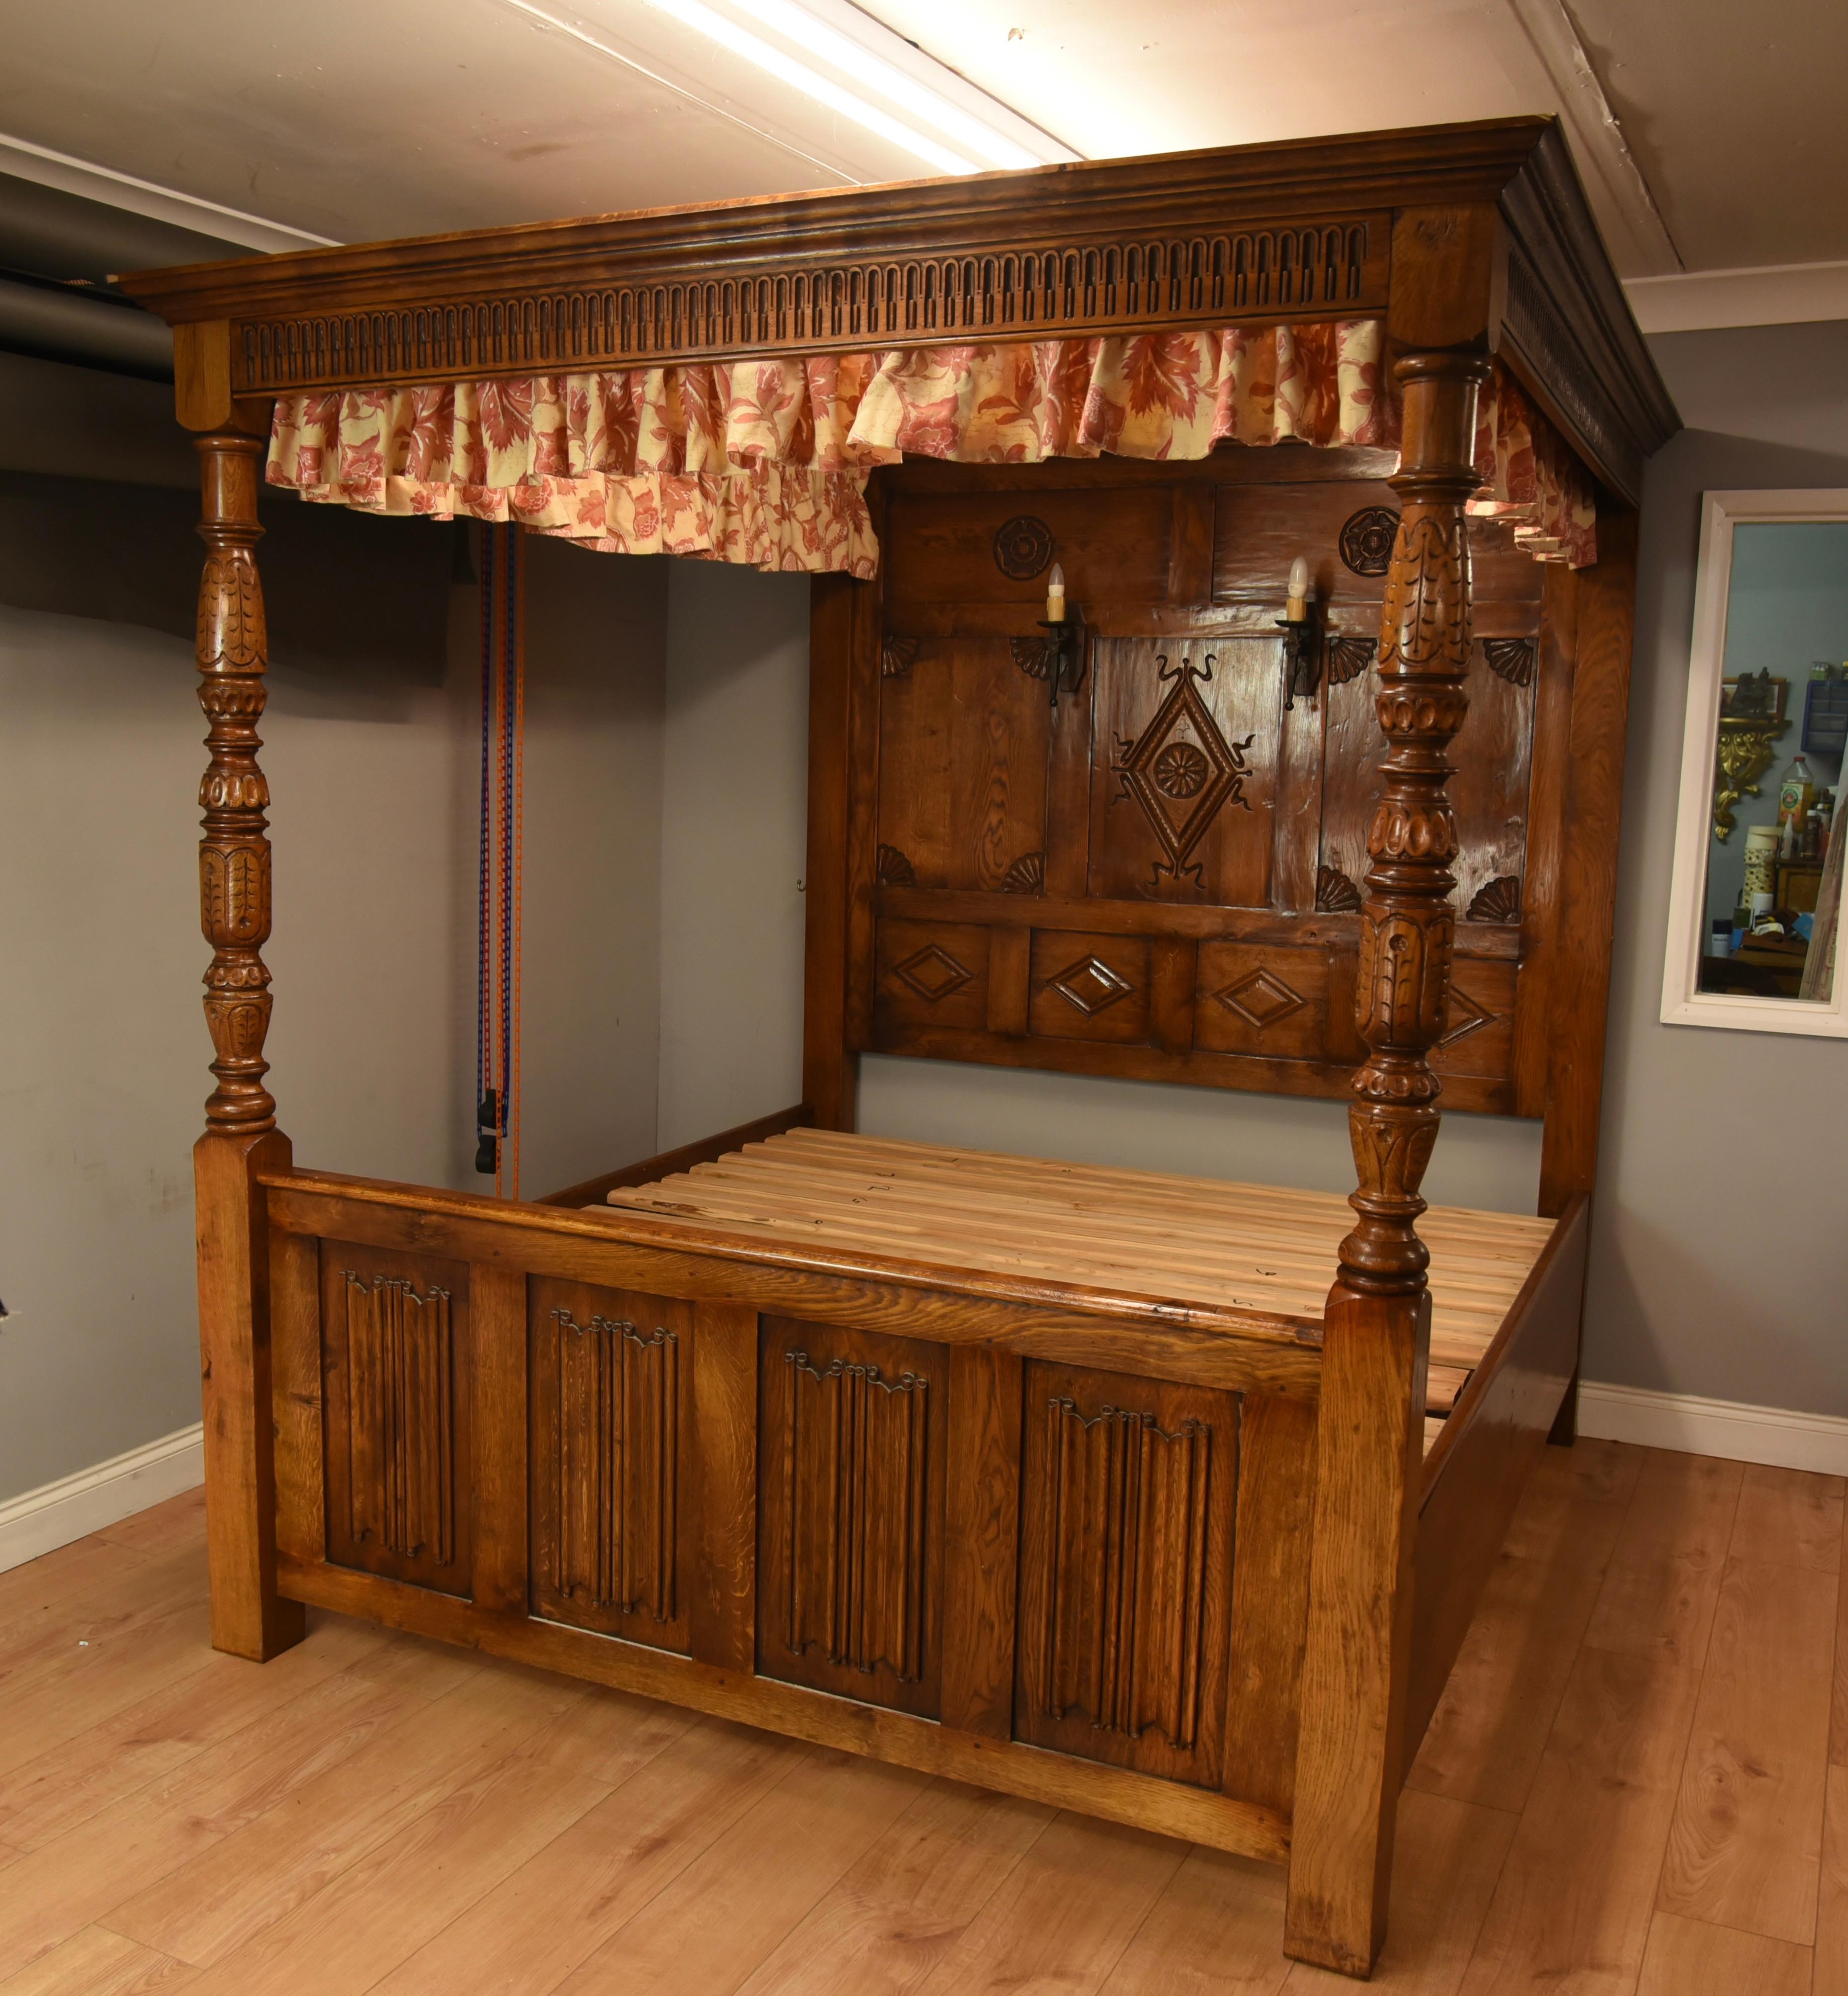 Fine Quality hand made solid English oak Tudor style carved oak super king size four poster bed.
The bed is constructed of the finest solid English oak that has been hand carved to the highest standard. It has been finished in the traditional way